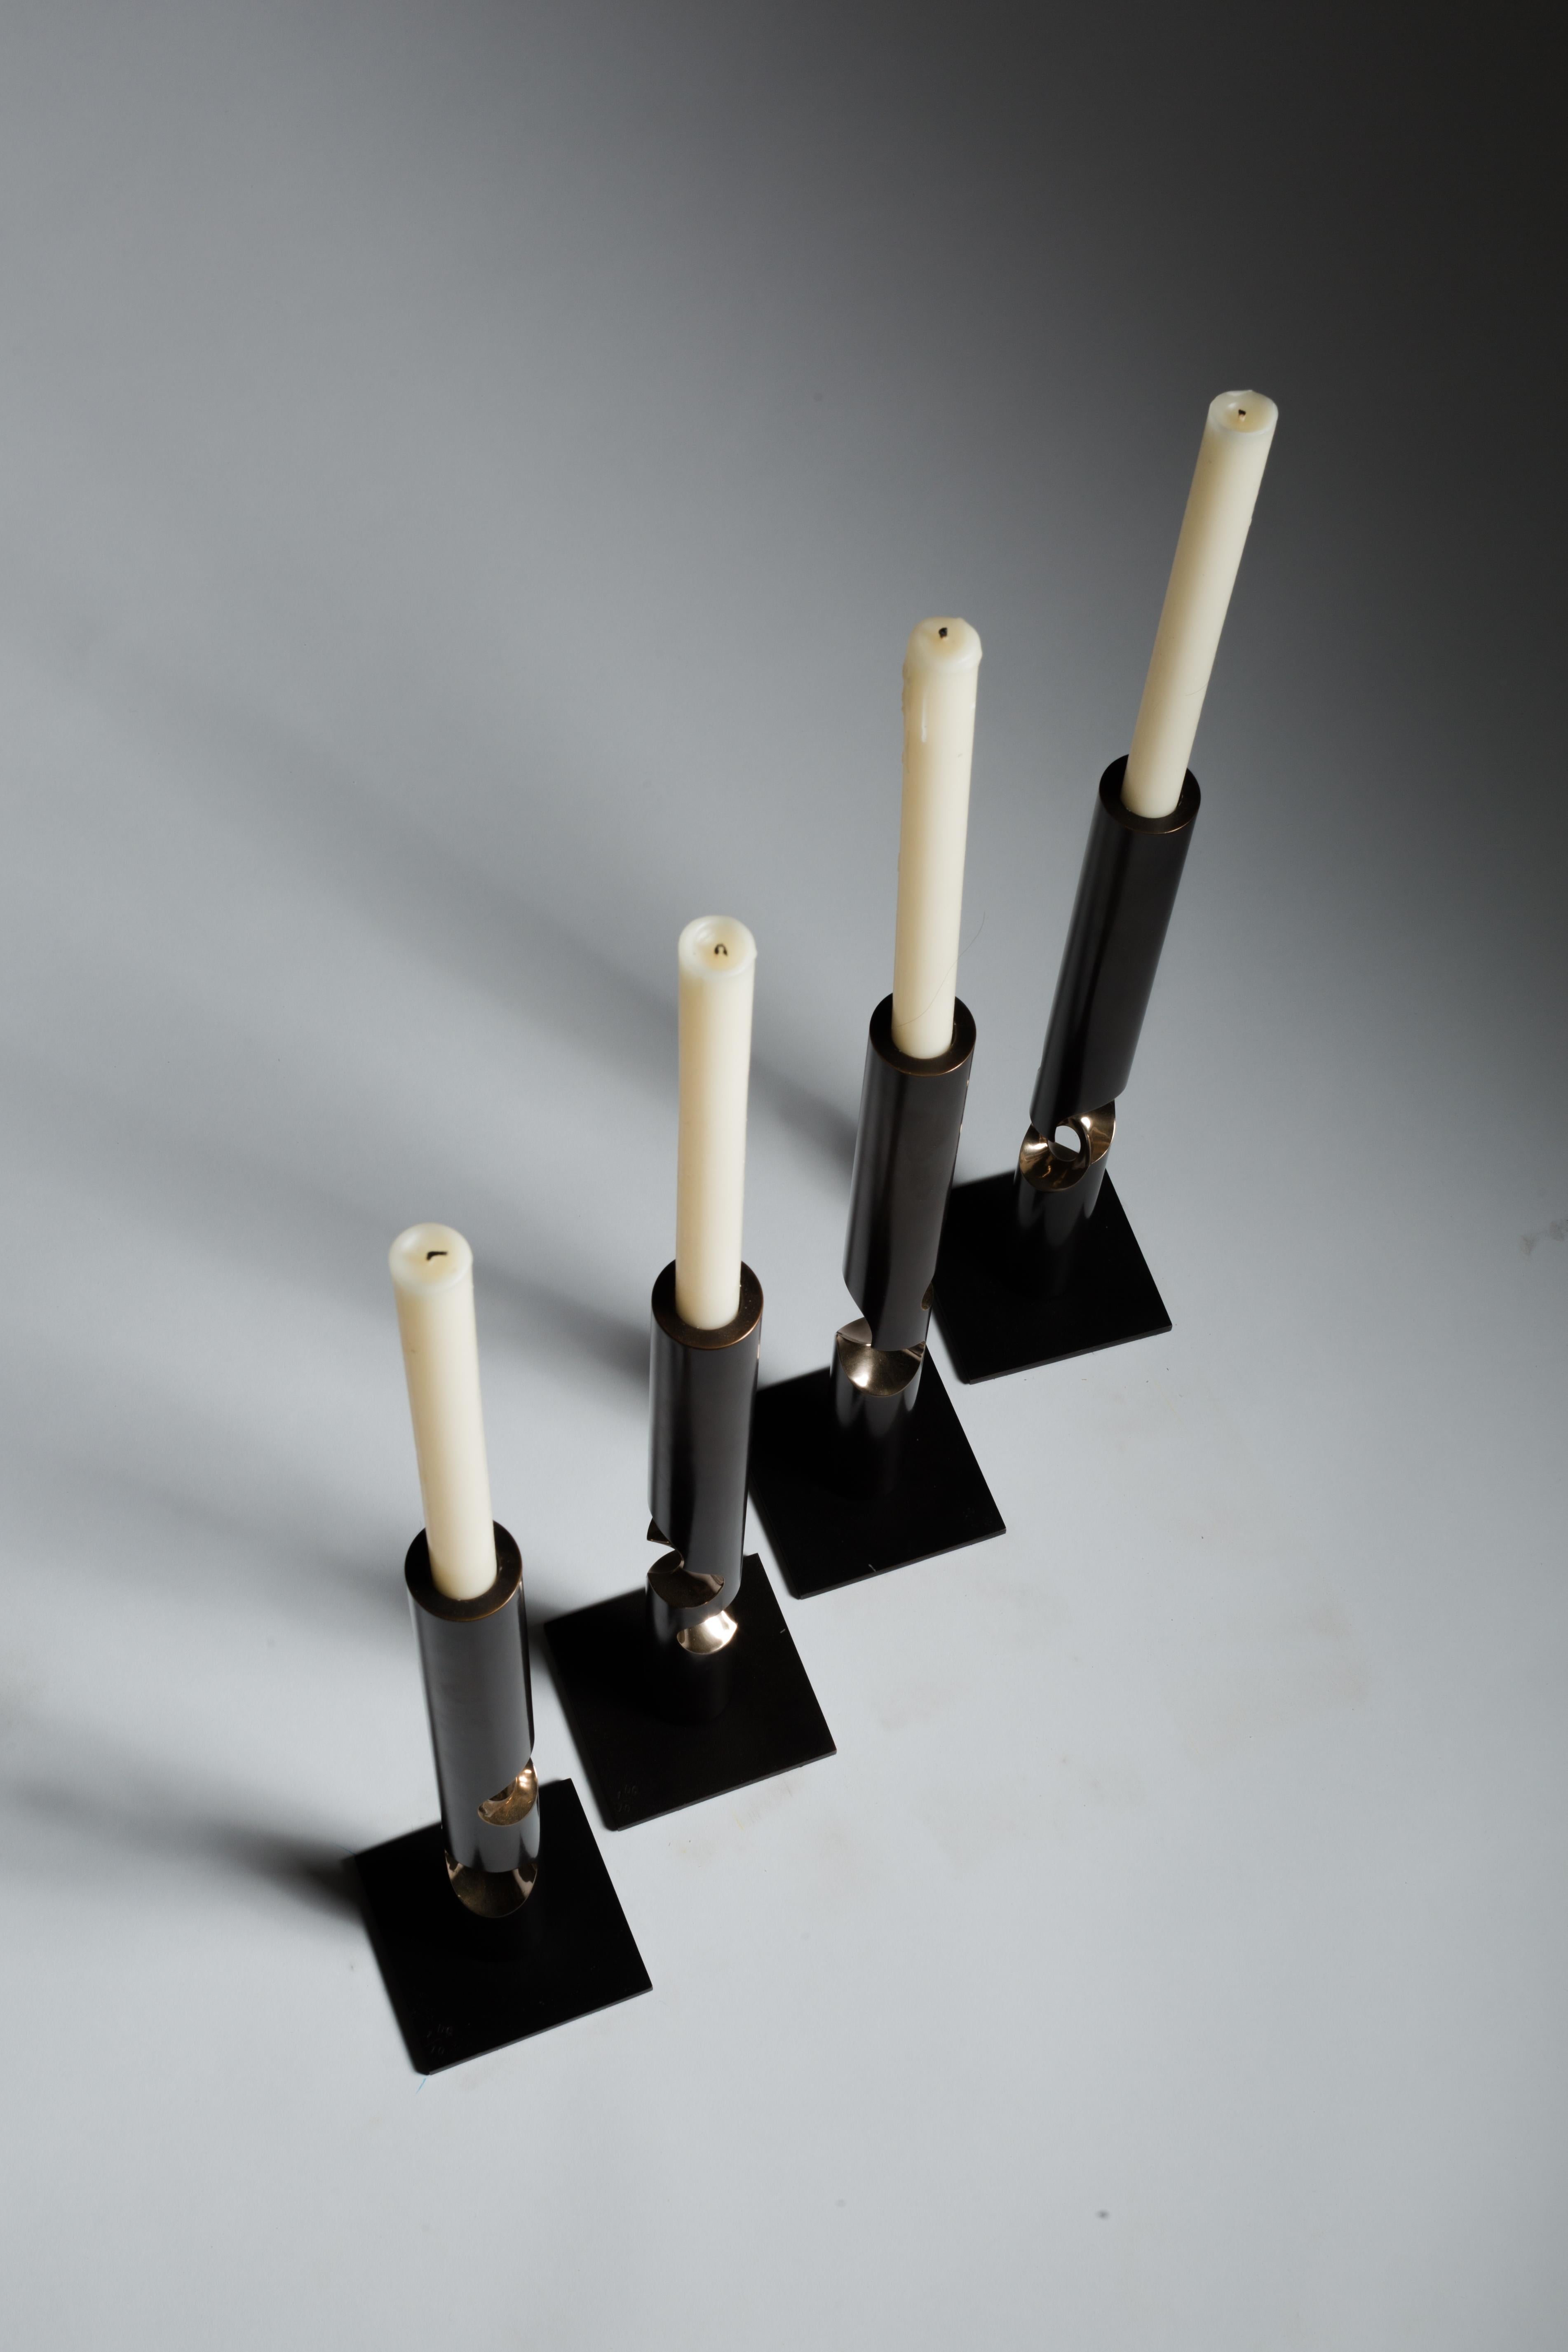 Candle Holder 001 
1/10
Bronze
10cm x 10cm x 37cm 
3,30Kg
2019

Crystalized Sculptures is an abstracted exploration of marks left on the physical mind by experiences of emotion and feelings. In Driaan Claassens' work, where whisps portray the